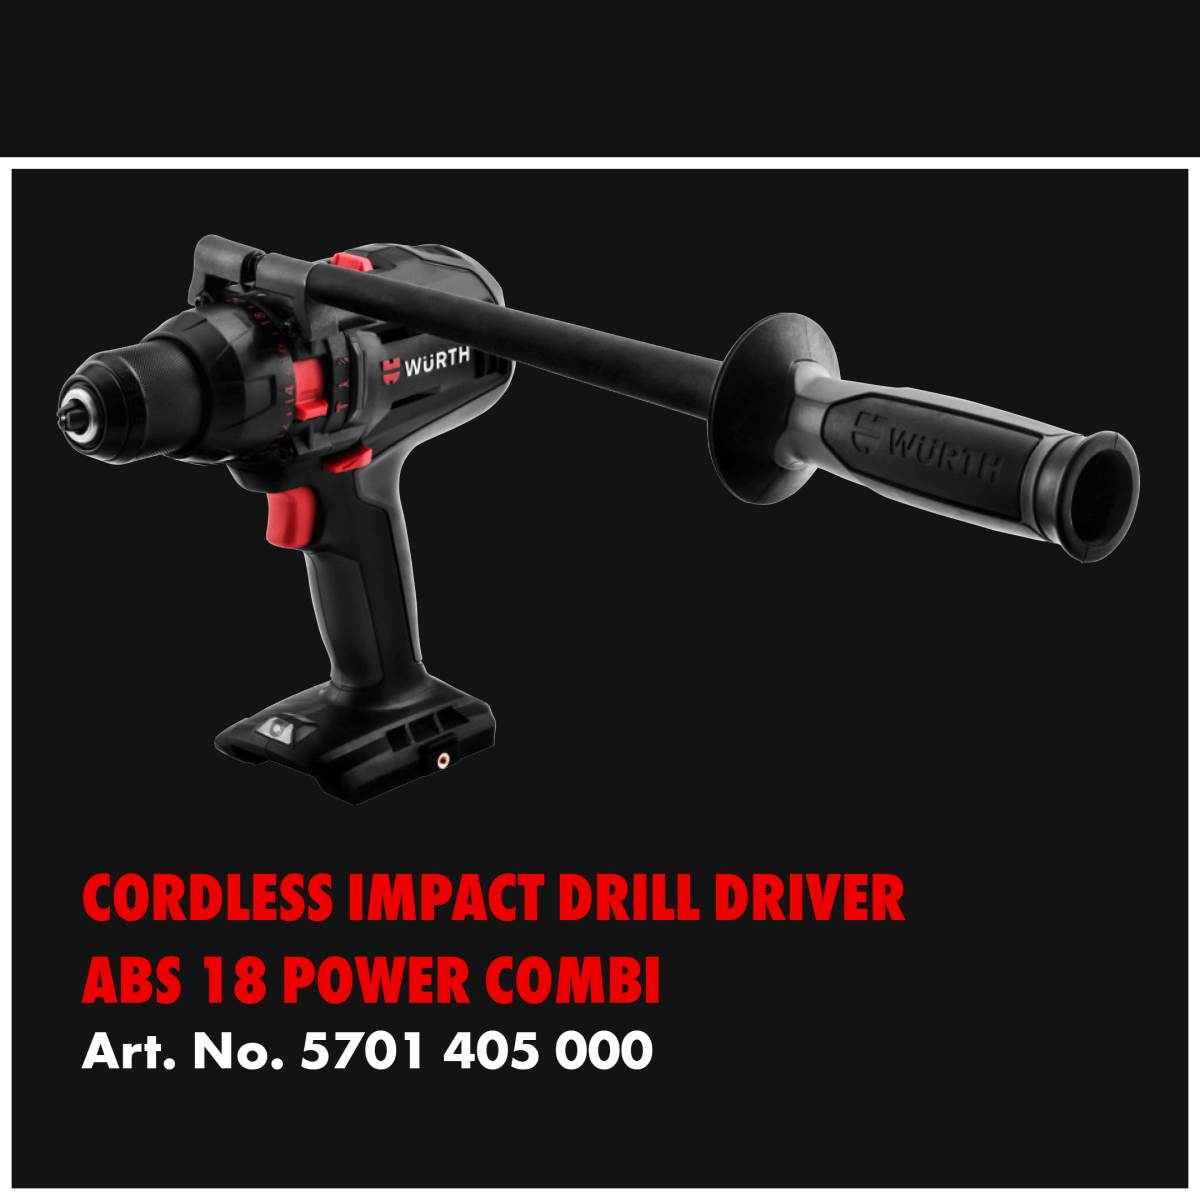 Cordless Drill Driver ABS-18 Power Combi